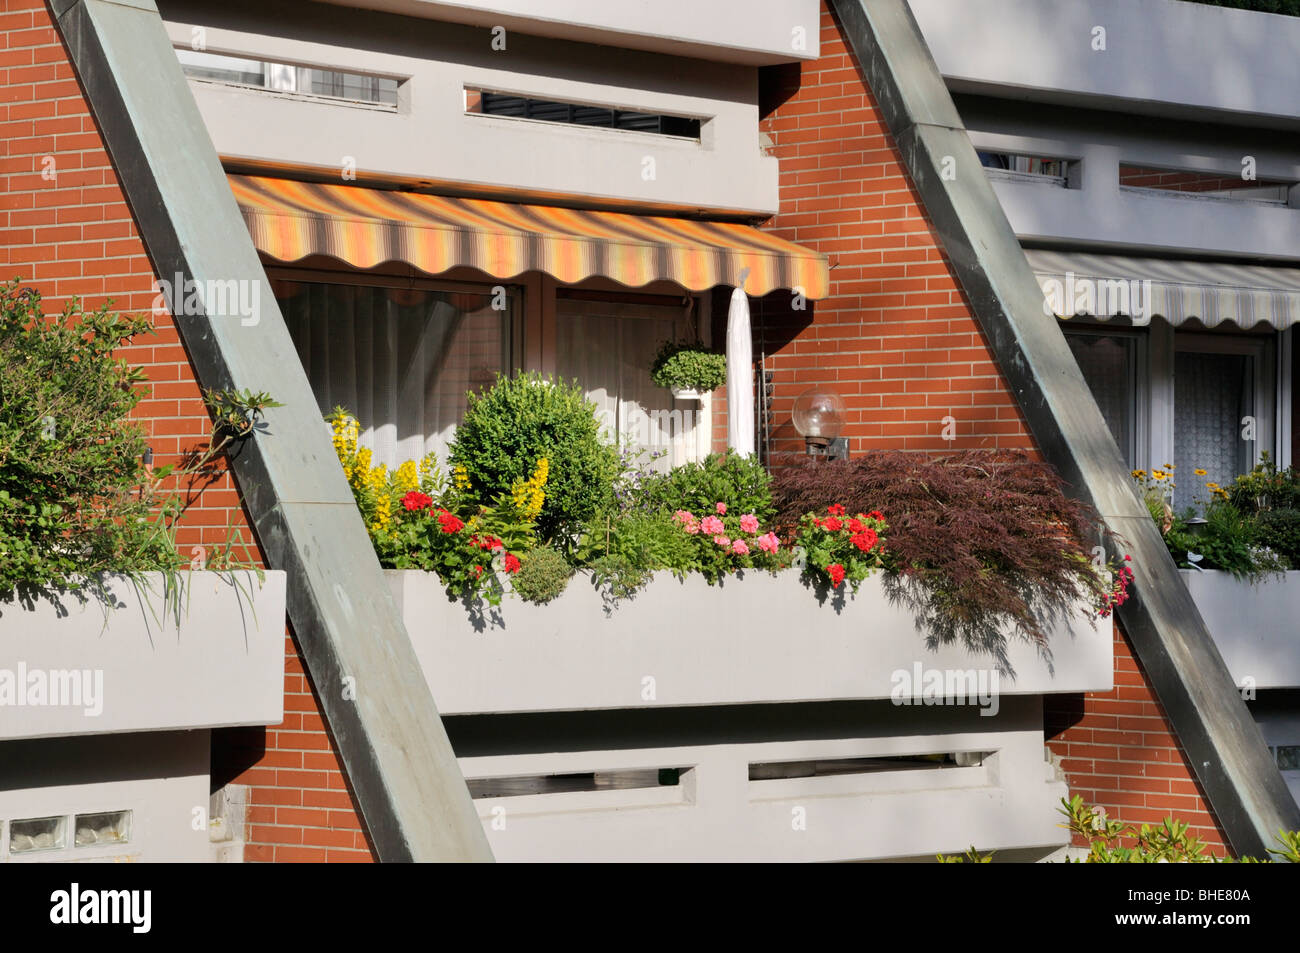 Balconies of a residential building Stock Photo